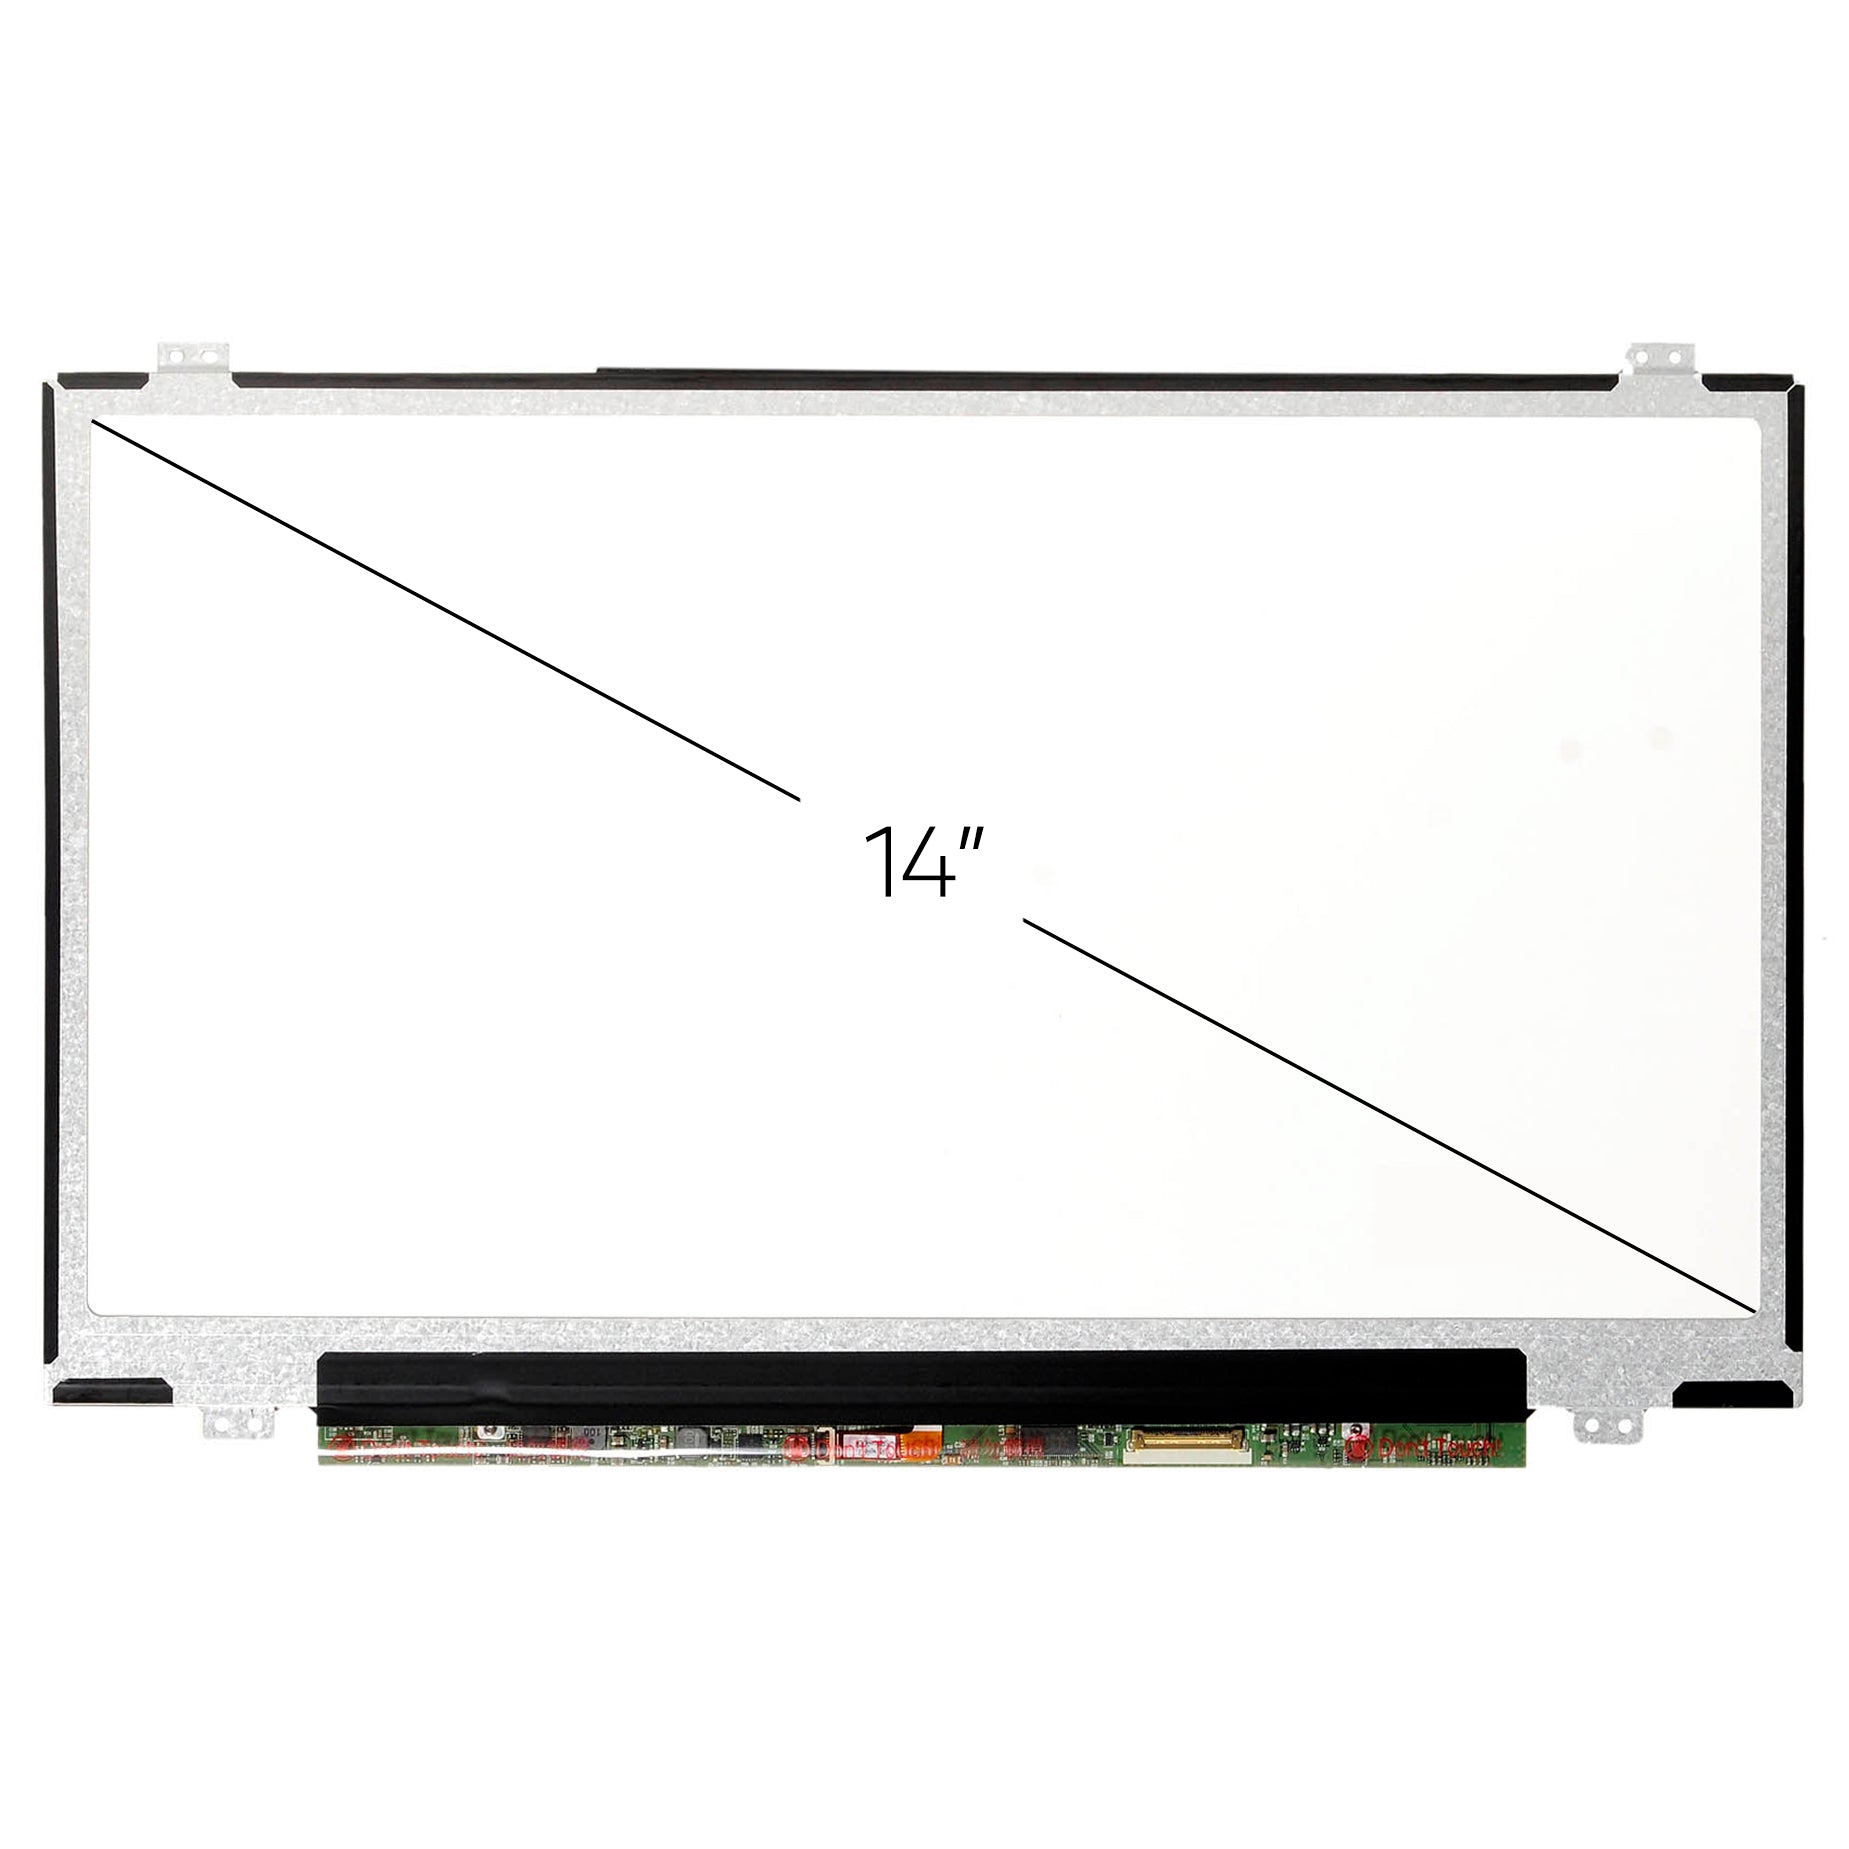 Screen Replacement for LP140WF1(SP)(B1) FHD 1920x1080 IPS Matte LCD LED Display